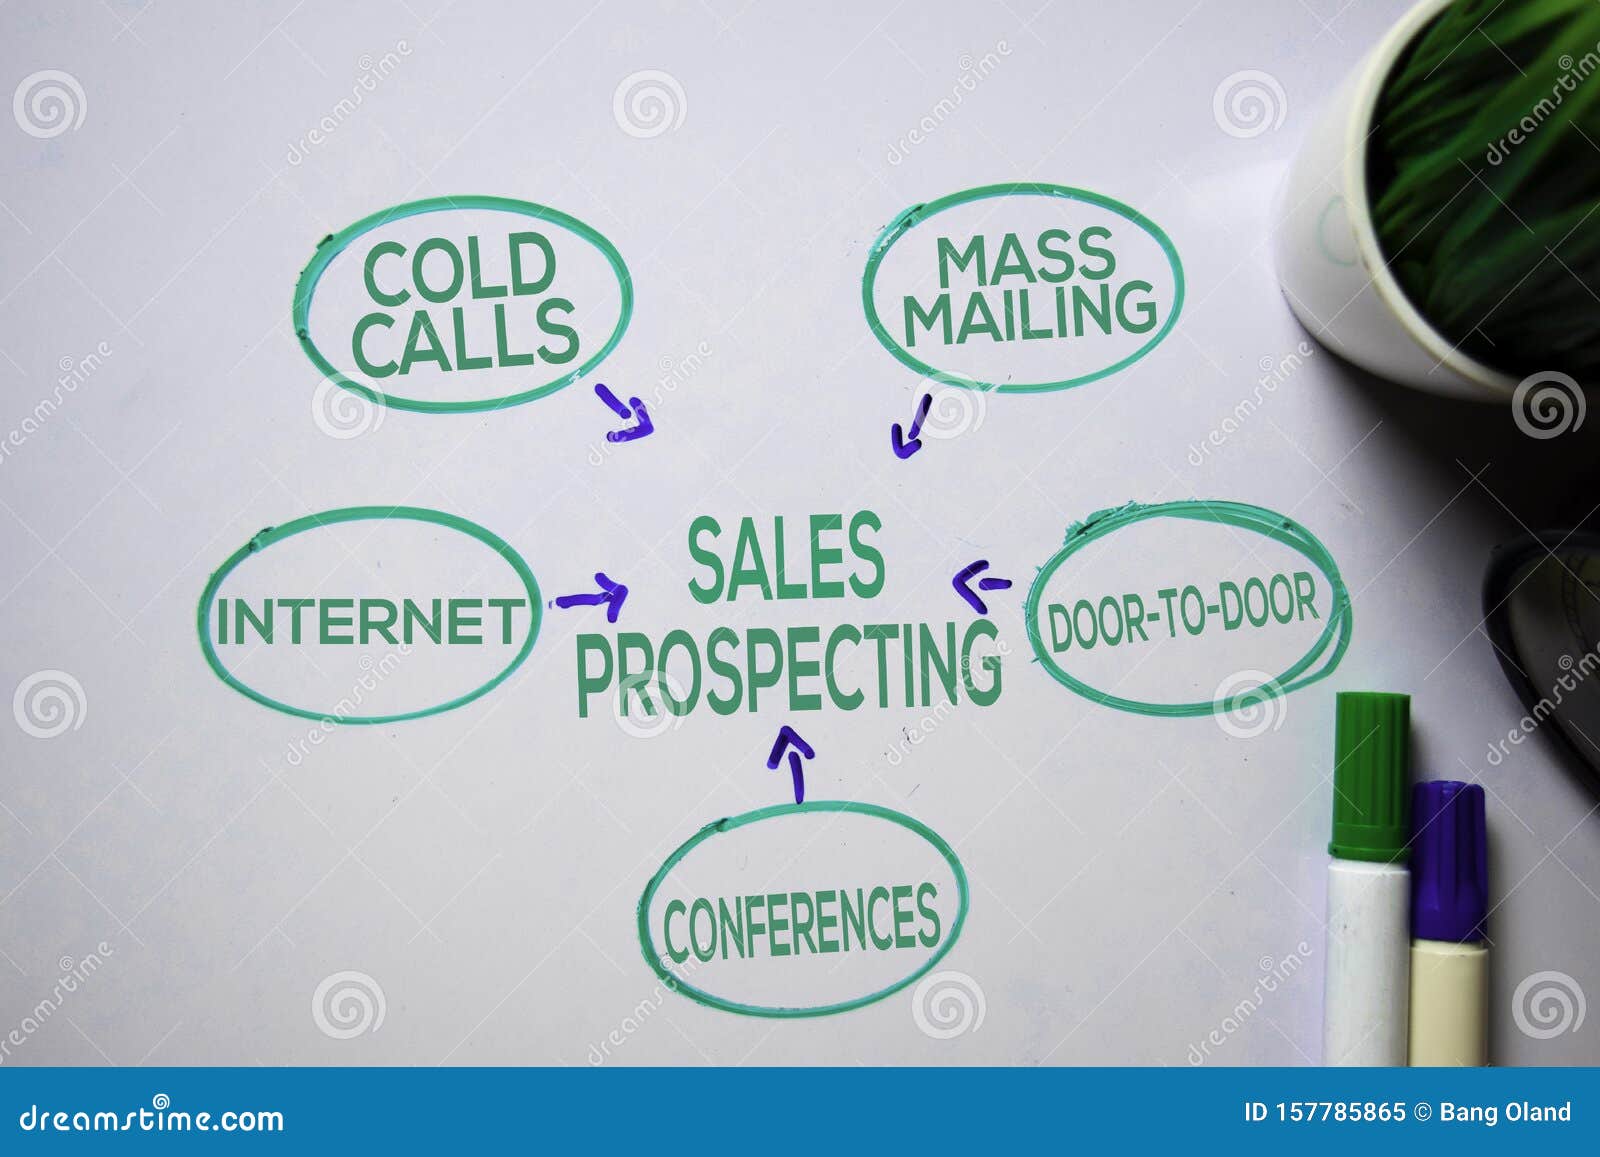 sales prospecting text with keywords  on white board background. chart or mechanism concept